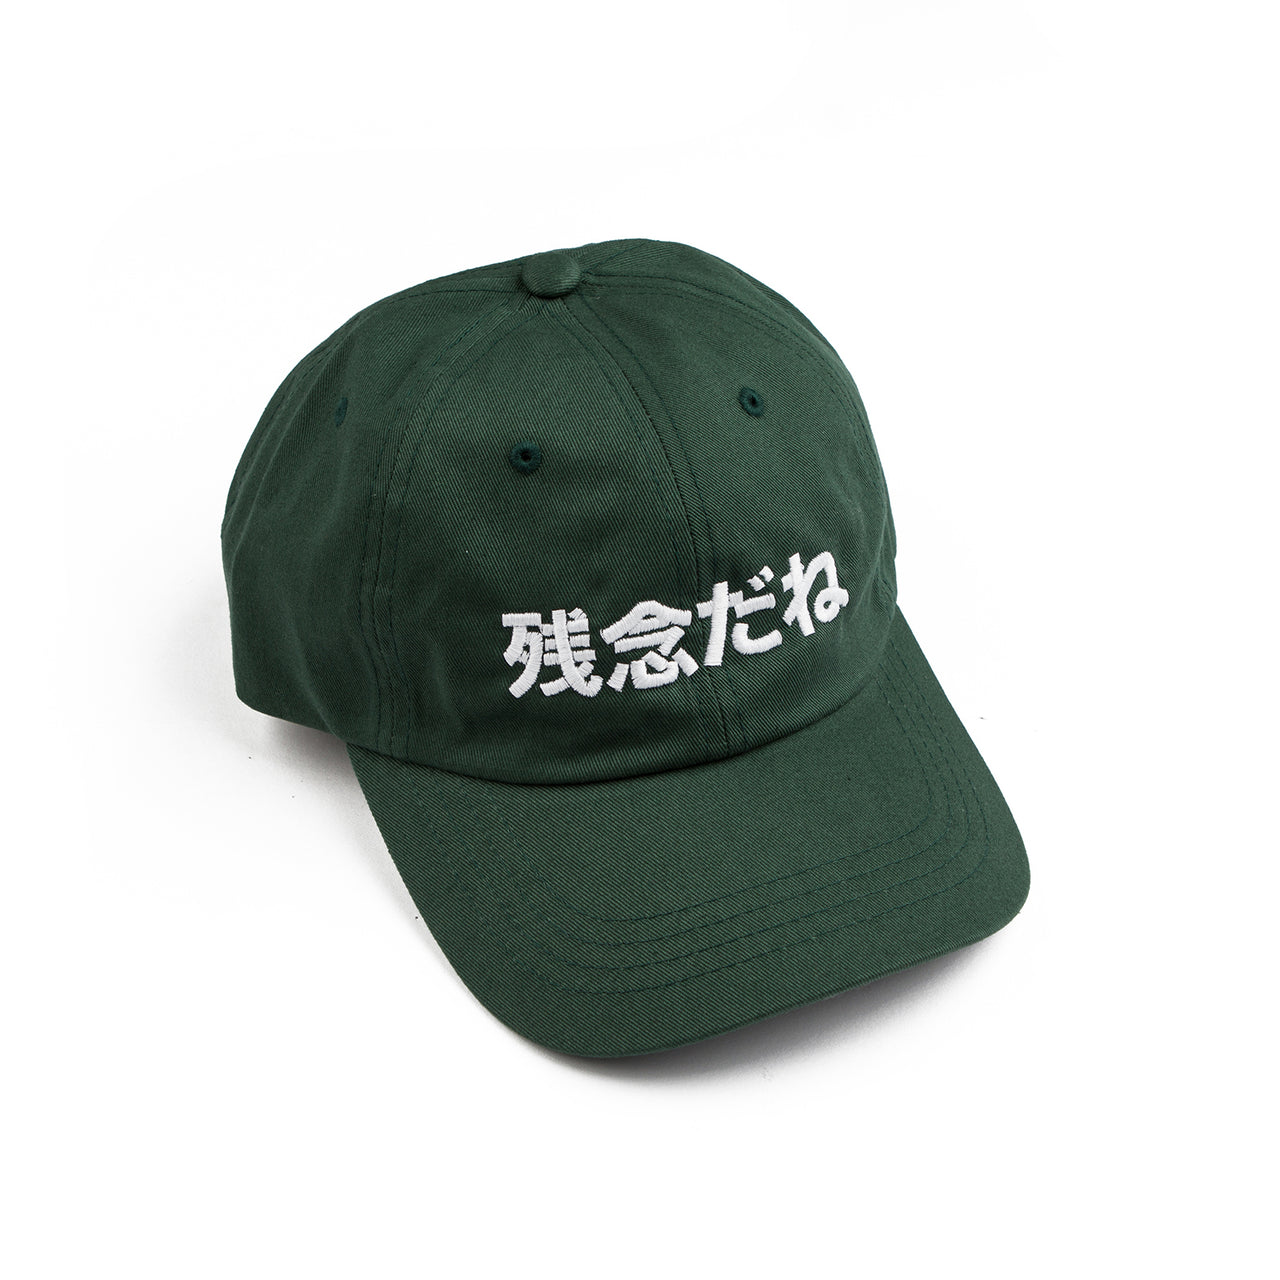 Too Bad Dad Hat in Spruce (Embroidered)